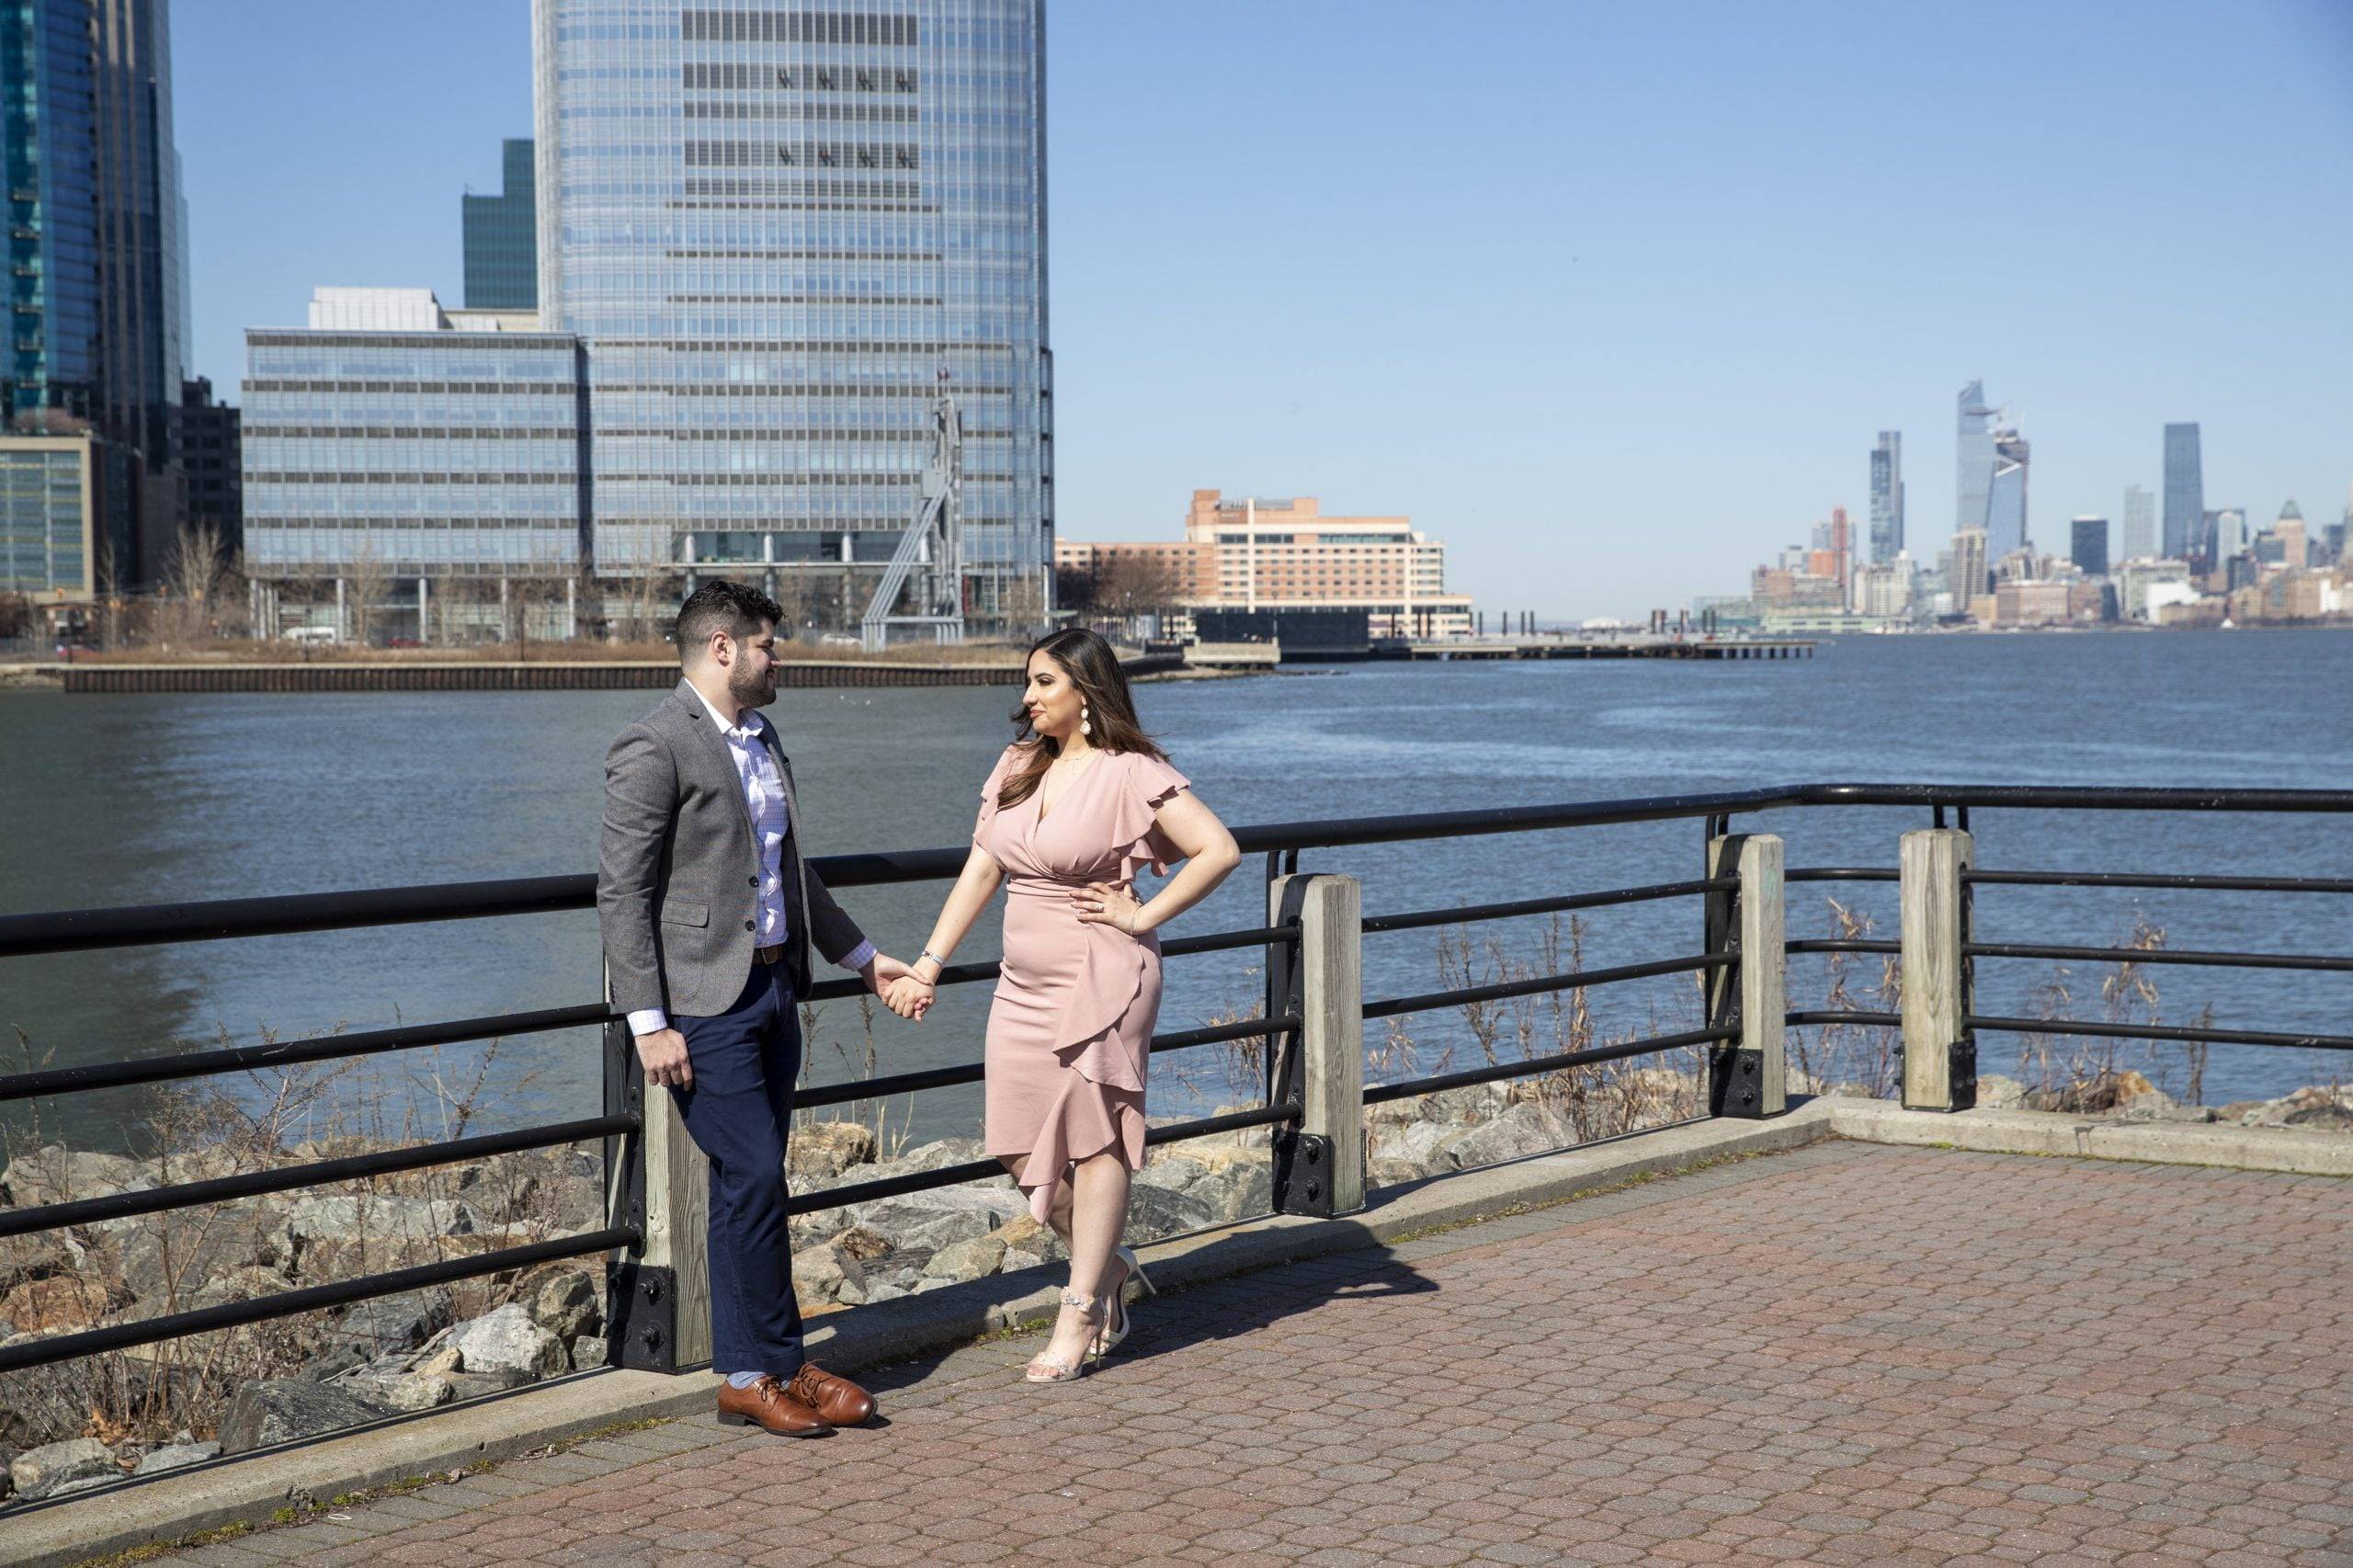 A couple standing on a bridge with the city skyline in the background.